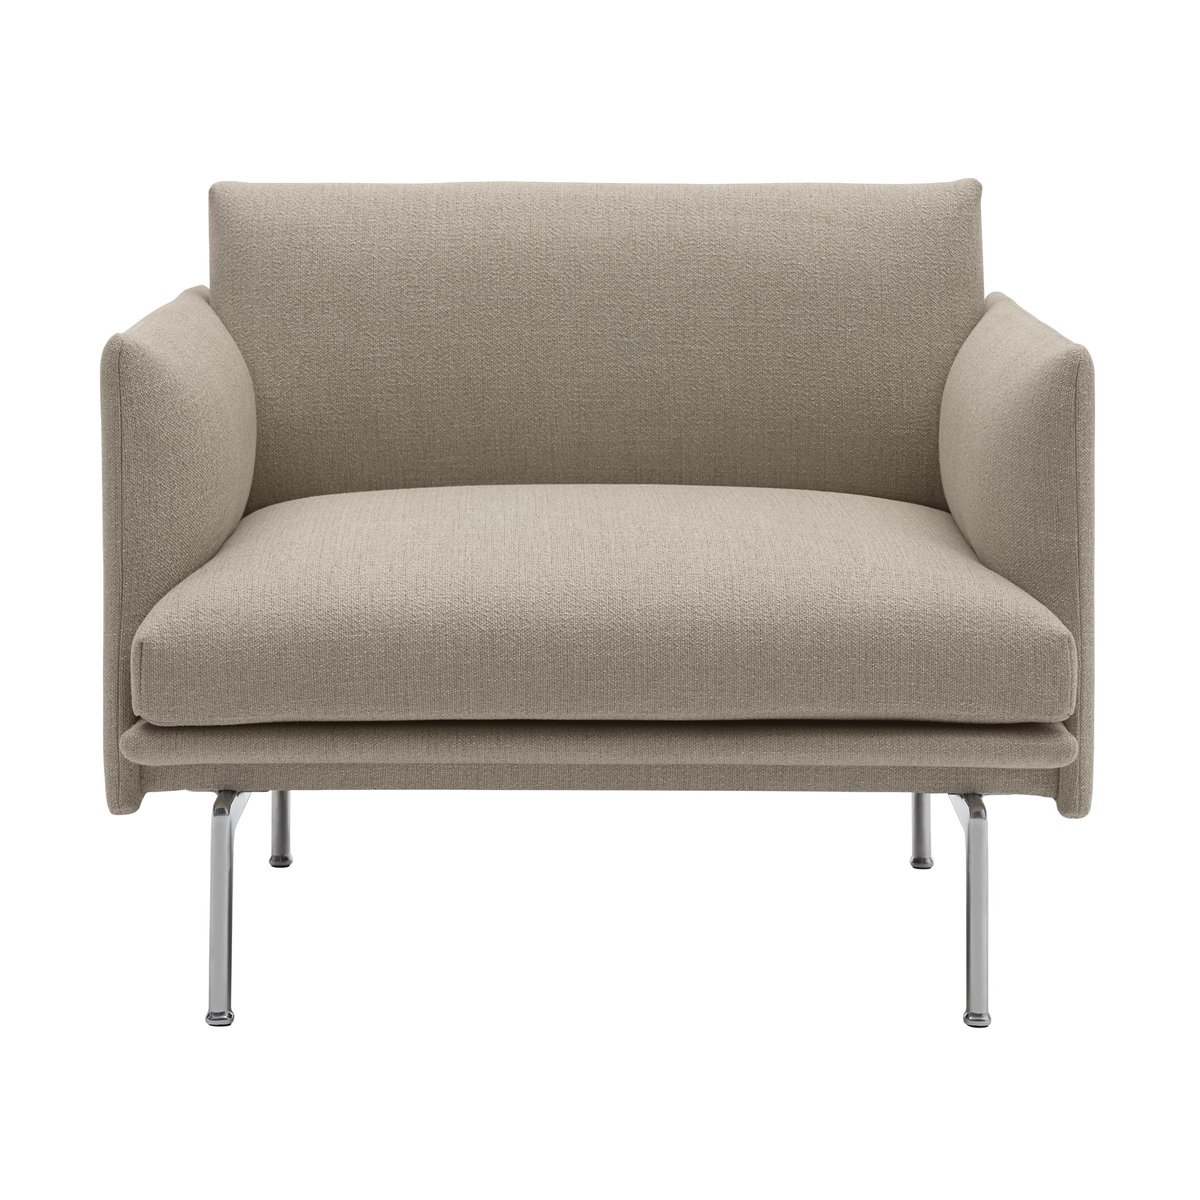 Muuto Outline chair fauteuil stof Ecriture 240-Polished Aluminum